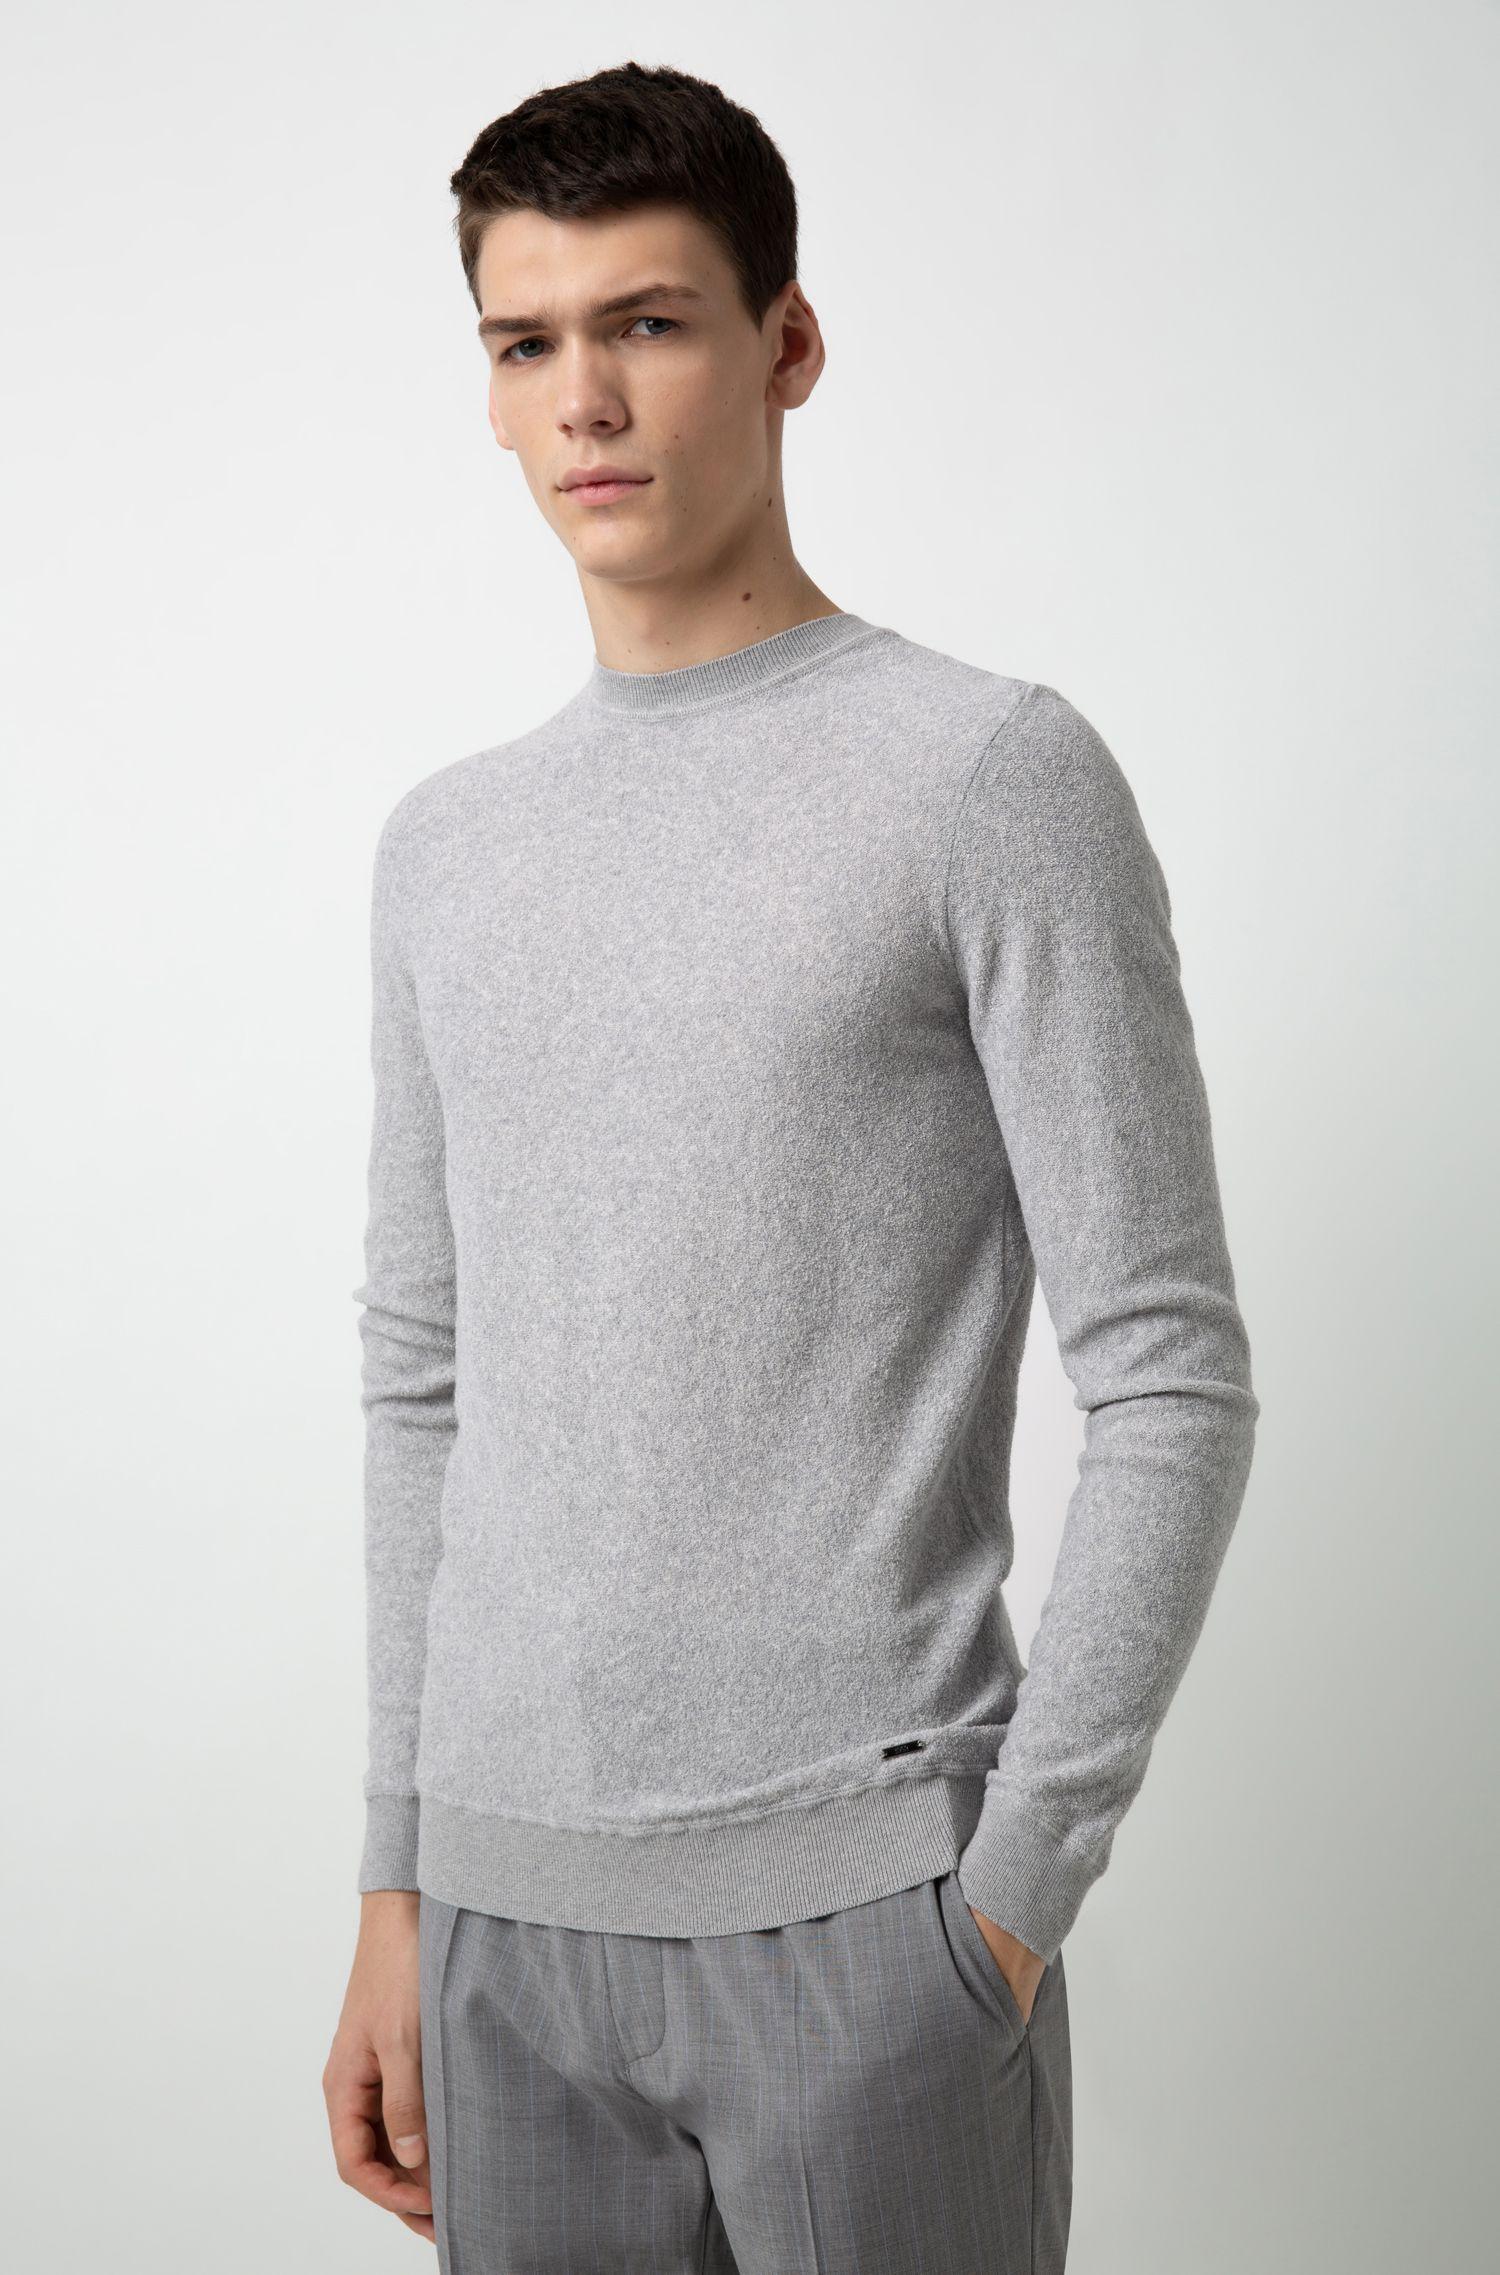 HUGO Relaxed-fit Sweater In Knitted Cotton-blend Bouclé in Gray for Men ...